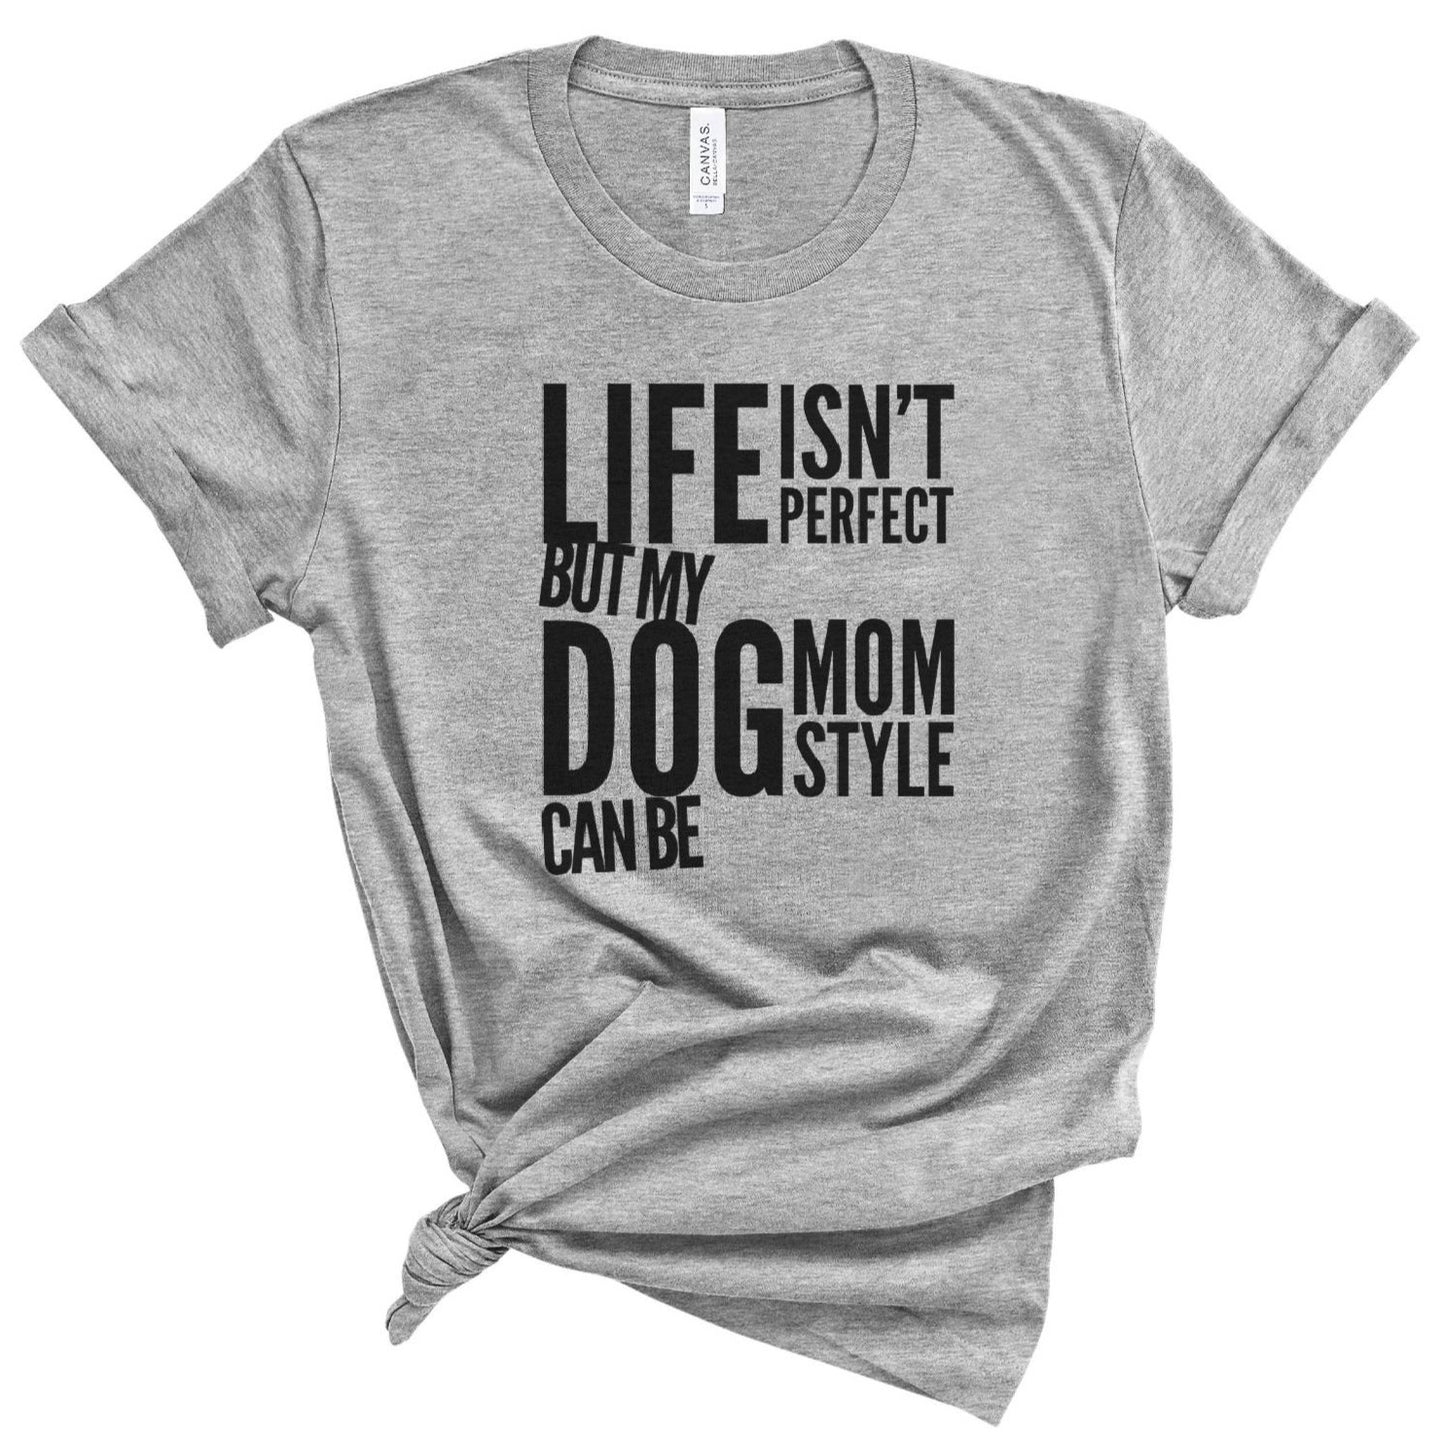 Life Isn't Perfect, But My Dog Mom Style Can Be T-shirt